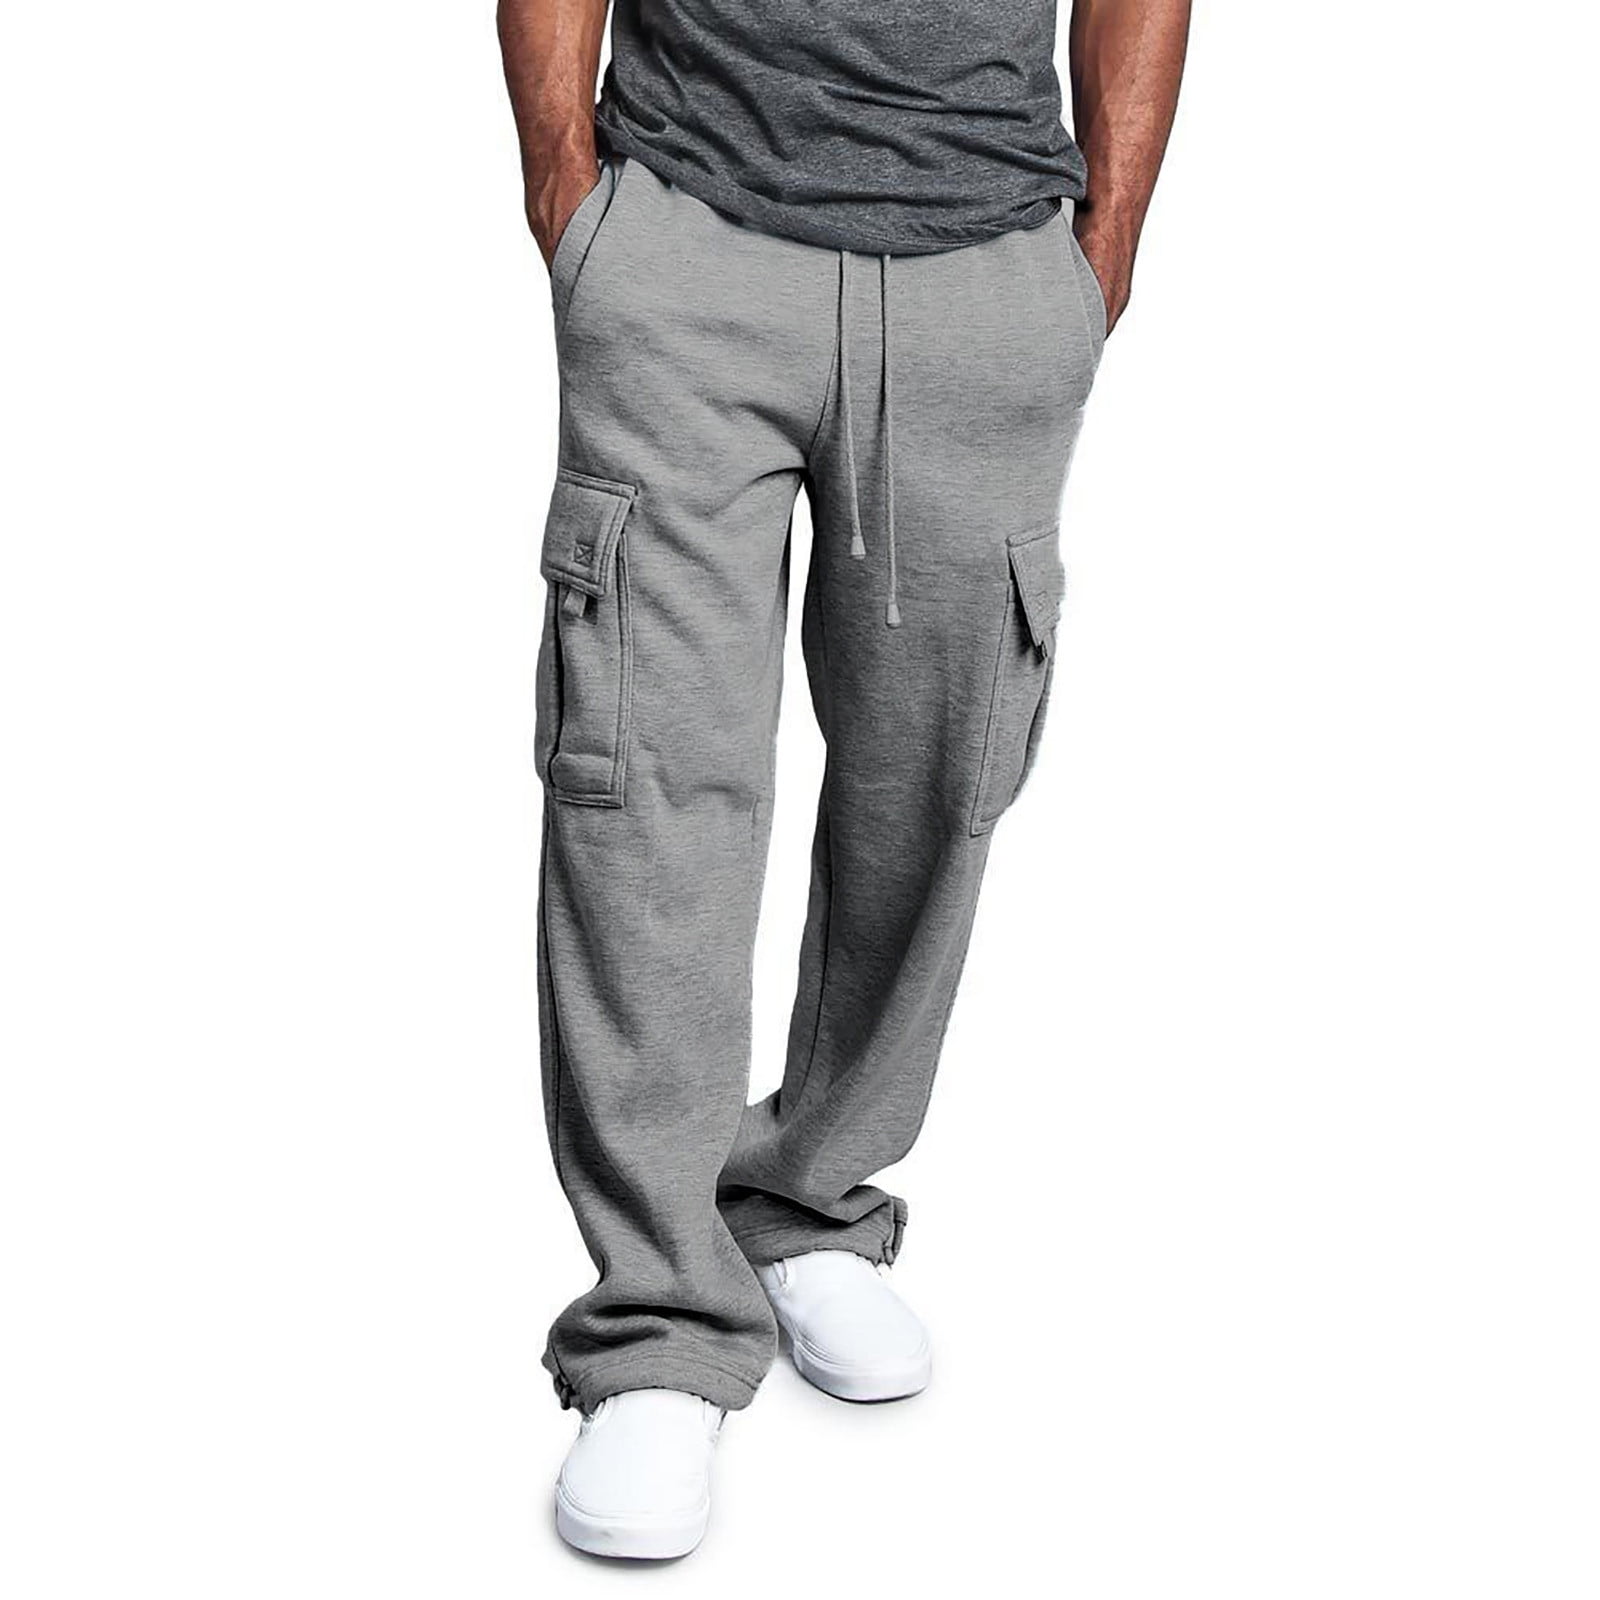 Winter thickened elastic waist men's trousers, fleece men's casual trousers,  plus size plus size multi-pocket overalls